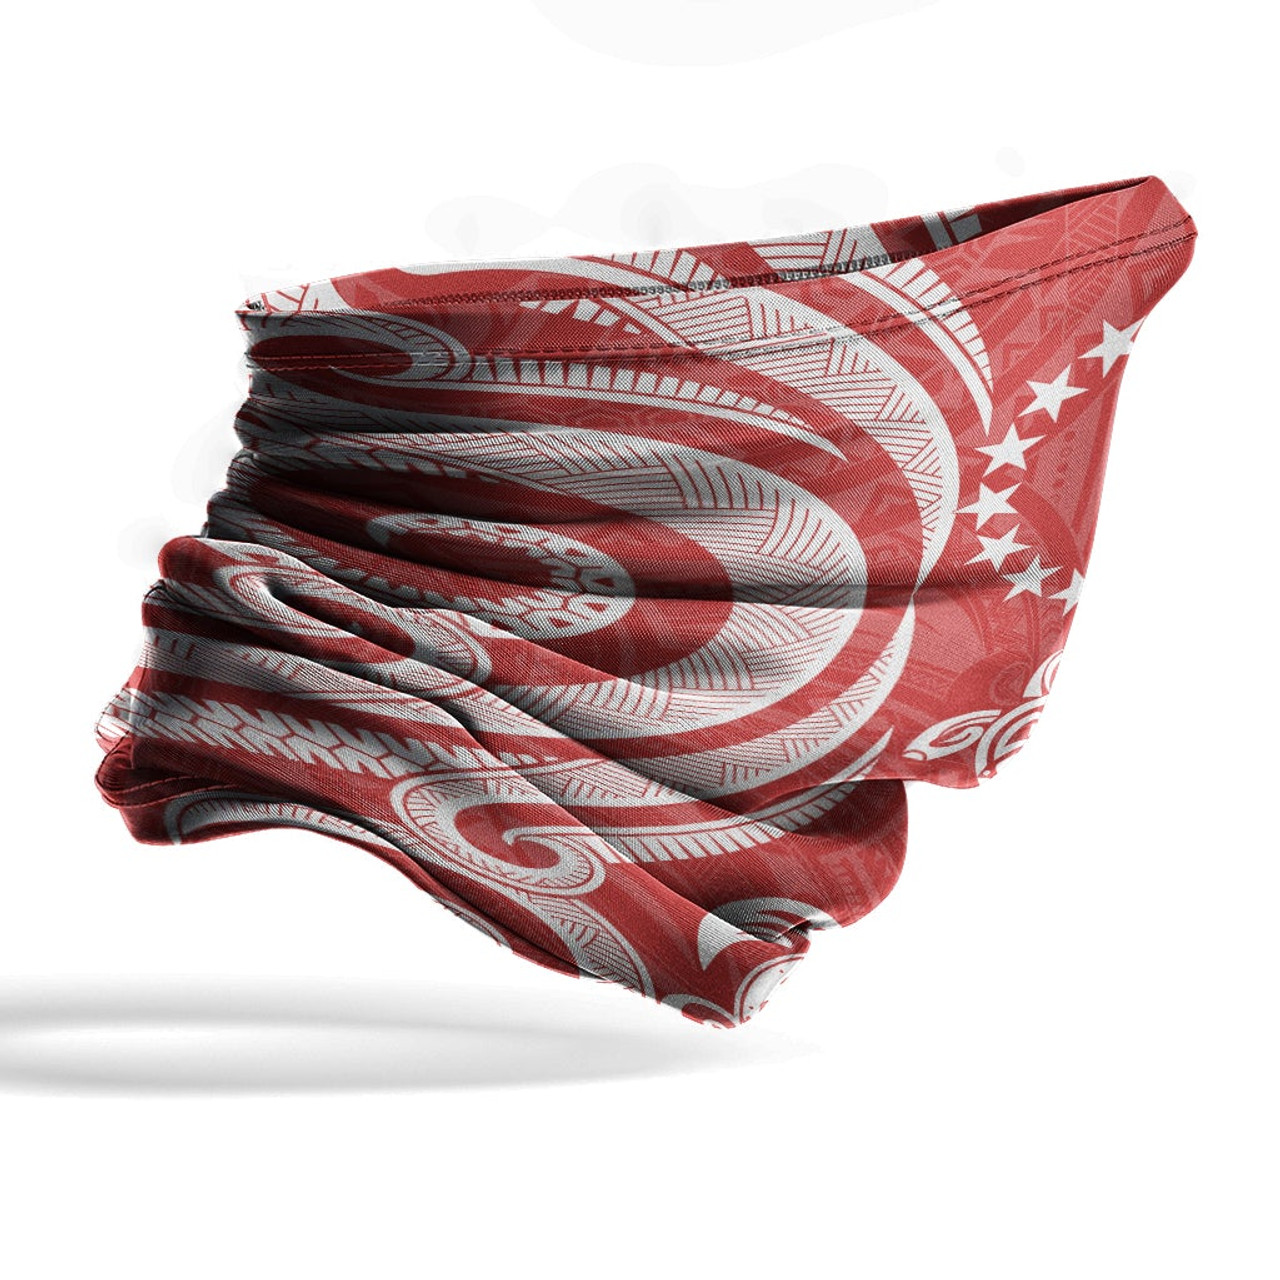 Cook islands Neck Gaiter - Turtle Tentacle White Red 4